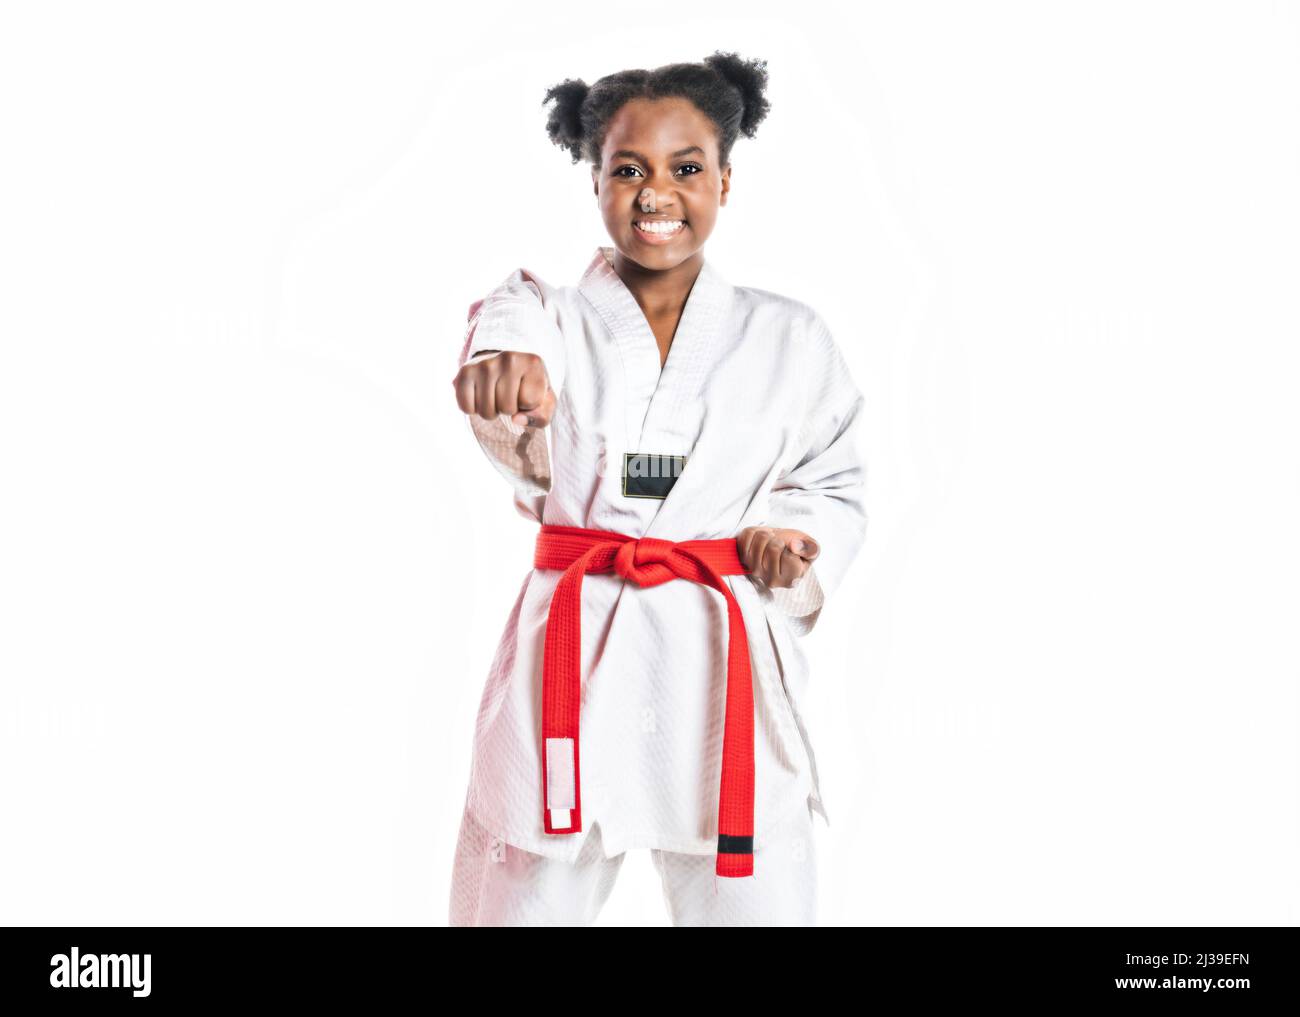 Young black belt karate fighter training Isolated portrait on white background Stock Photo